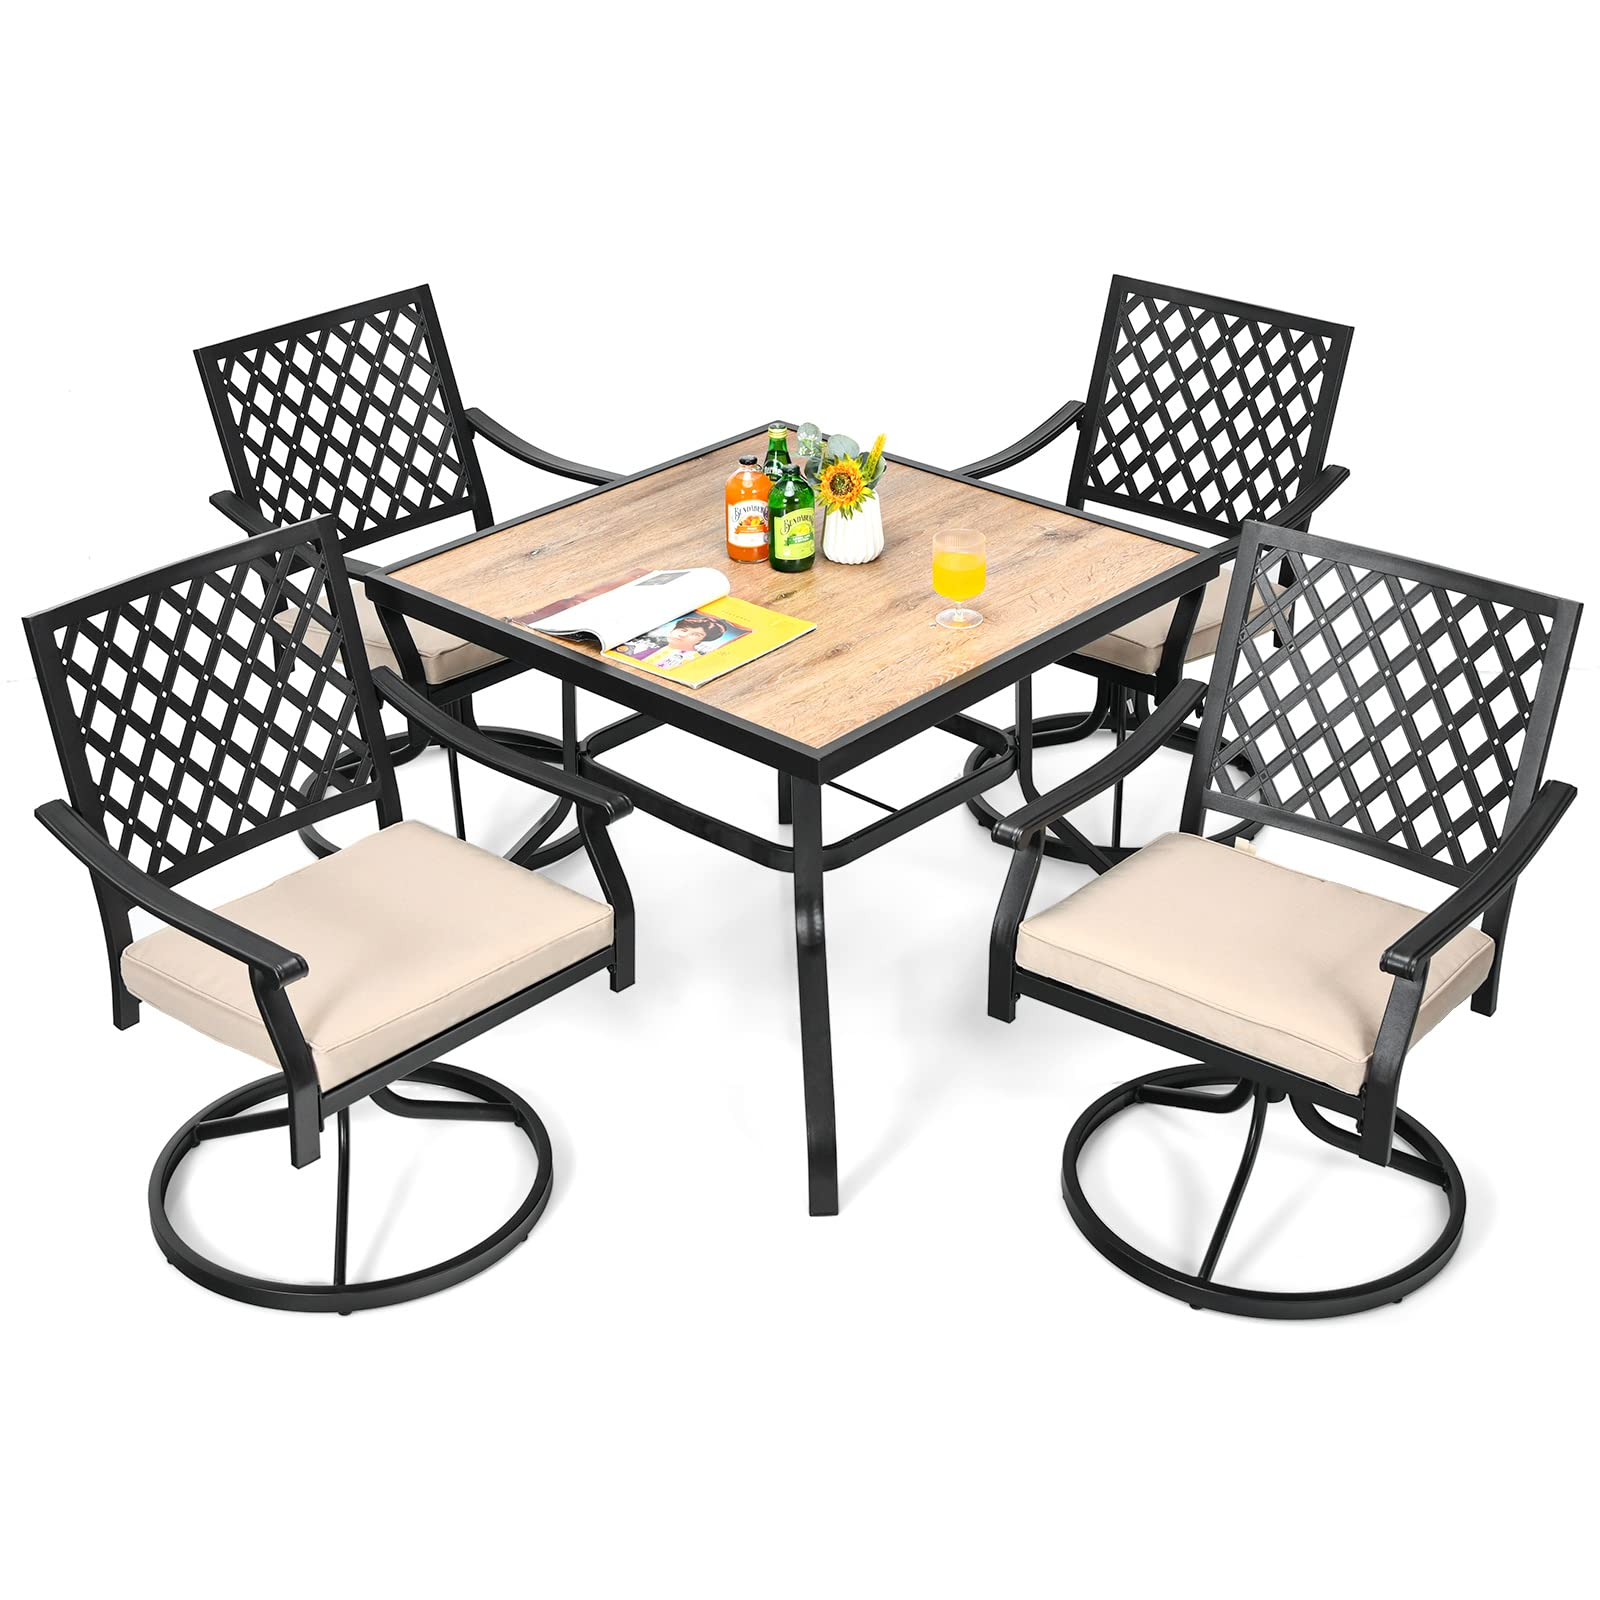 Giantex 2 Pack Swivel Outdoor Chairs, Set of 2 Patio Dining Rocking Chairs